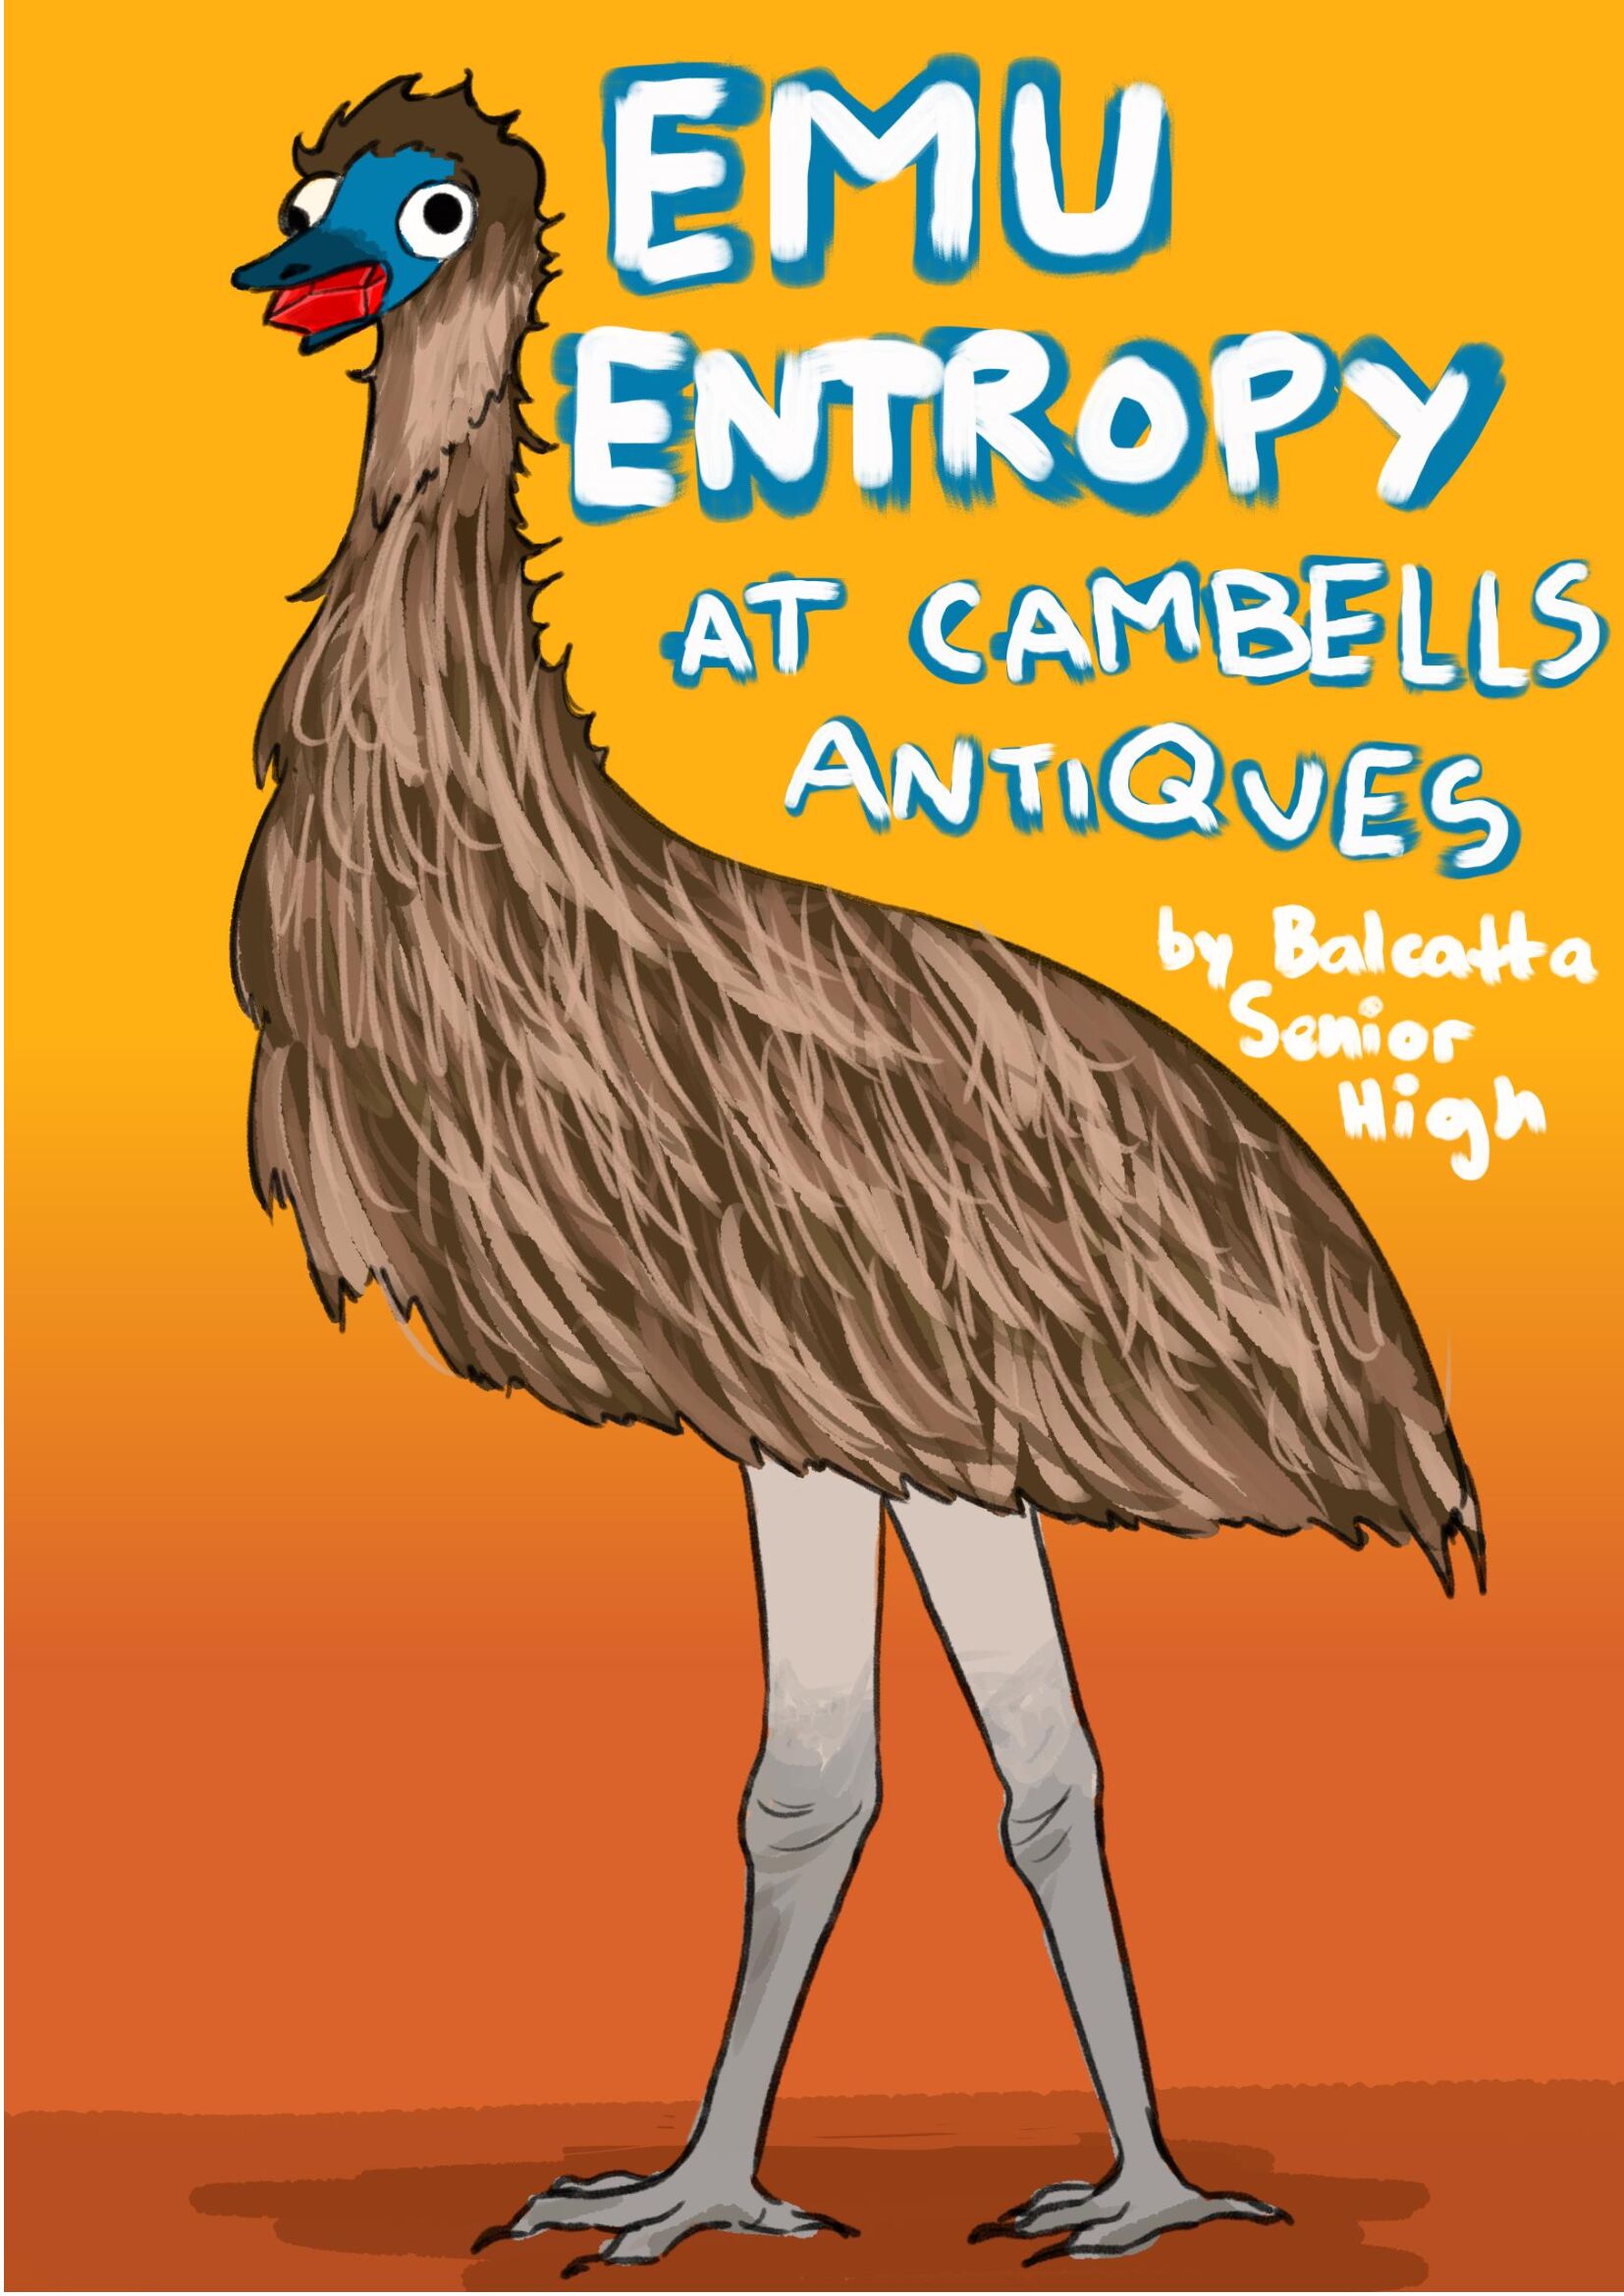 Emu Entropy at Cambell's Antiques